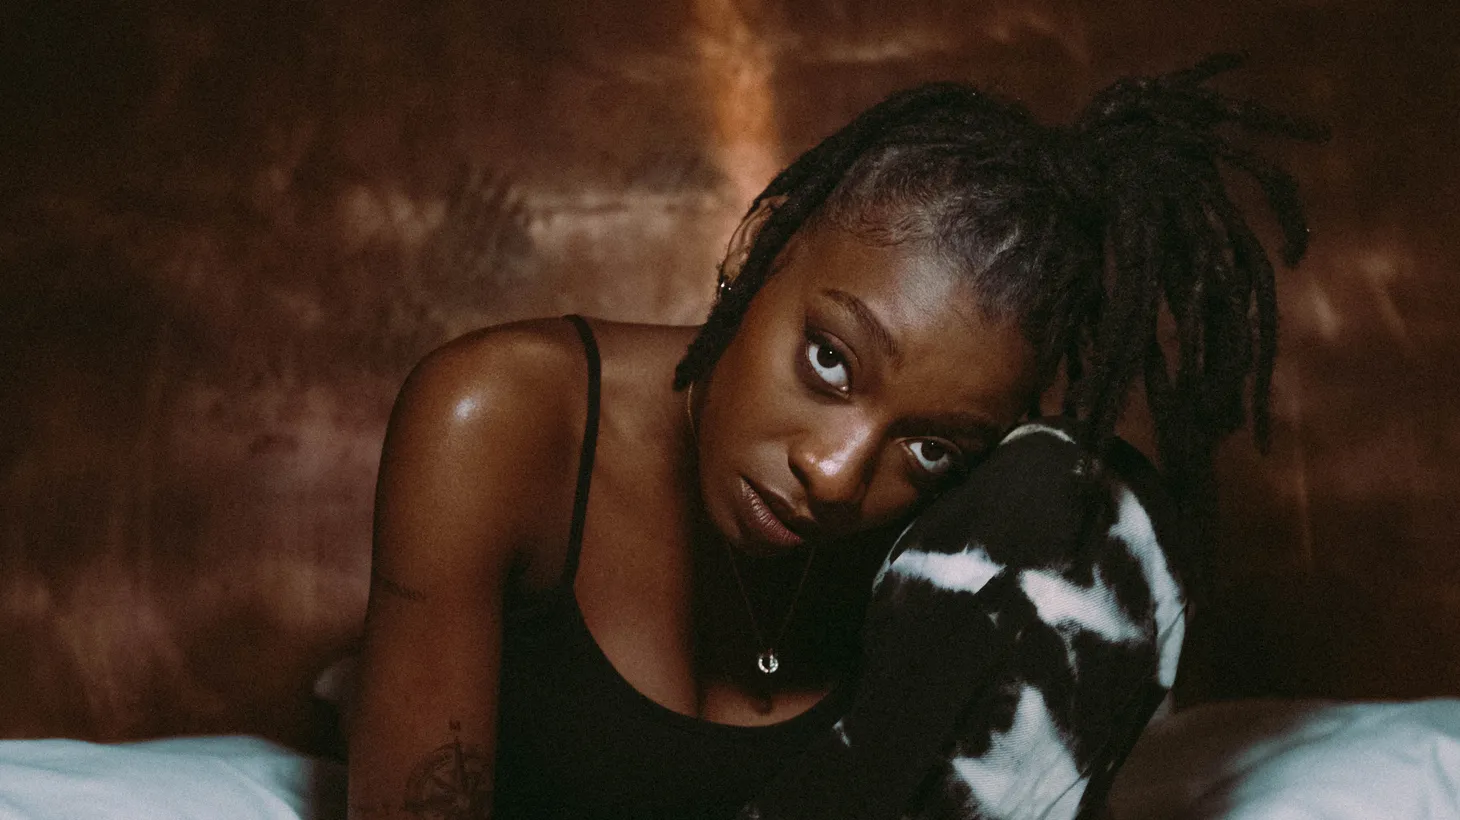 Little Simz’s “NO THANK YOU” is the mantra we all need for 2023.